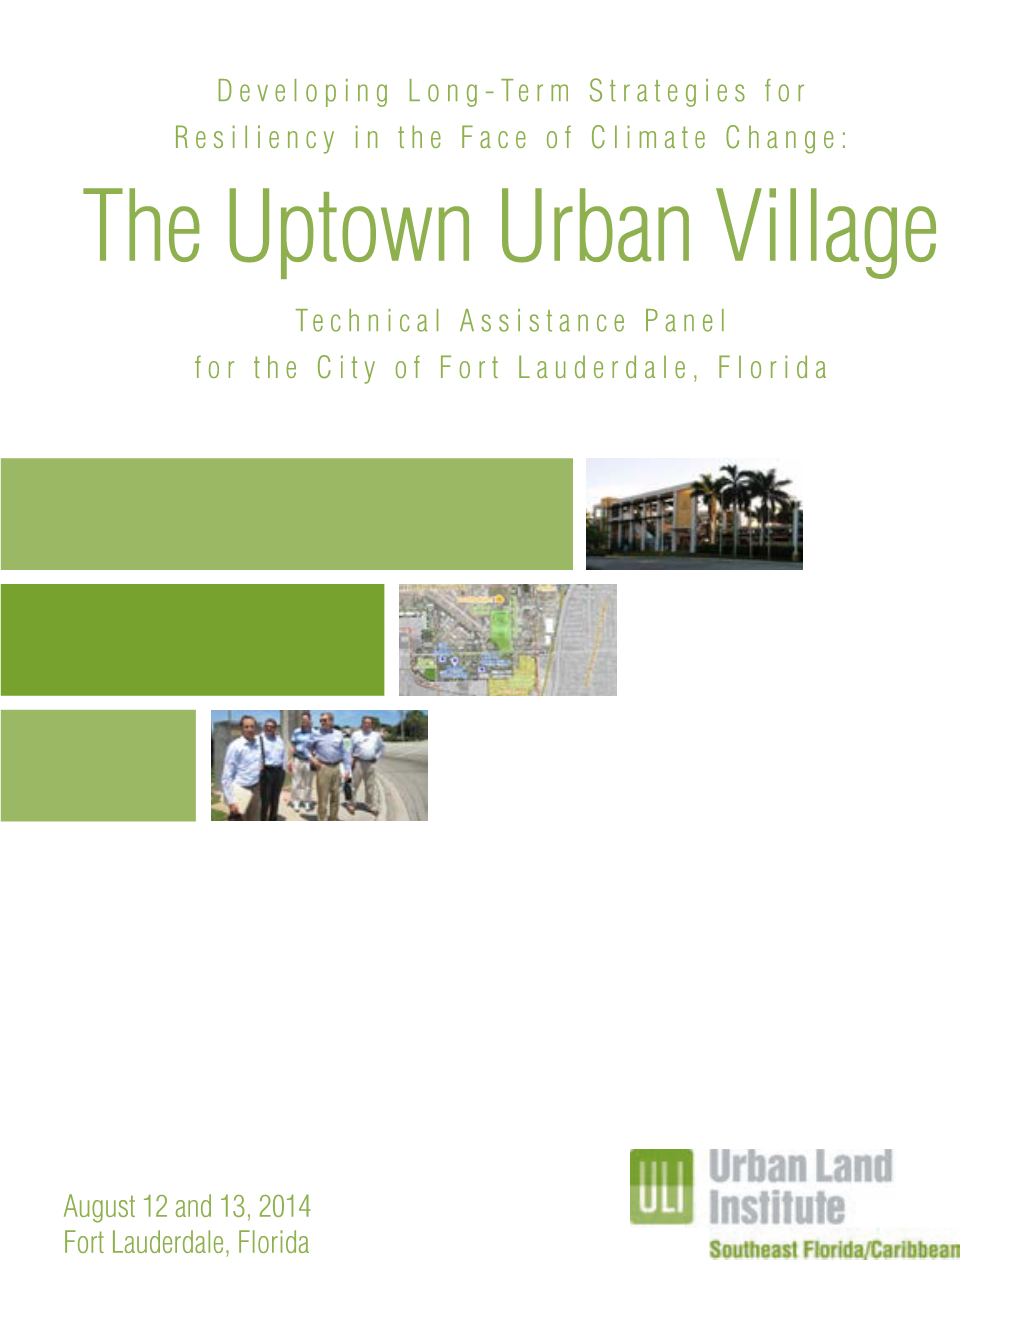 The Uptown Urban Village Technical Assistance Panel for the City of Fort Lauderdale, Florida